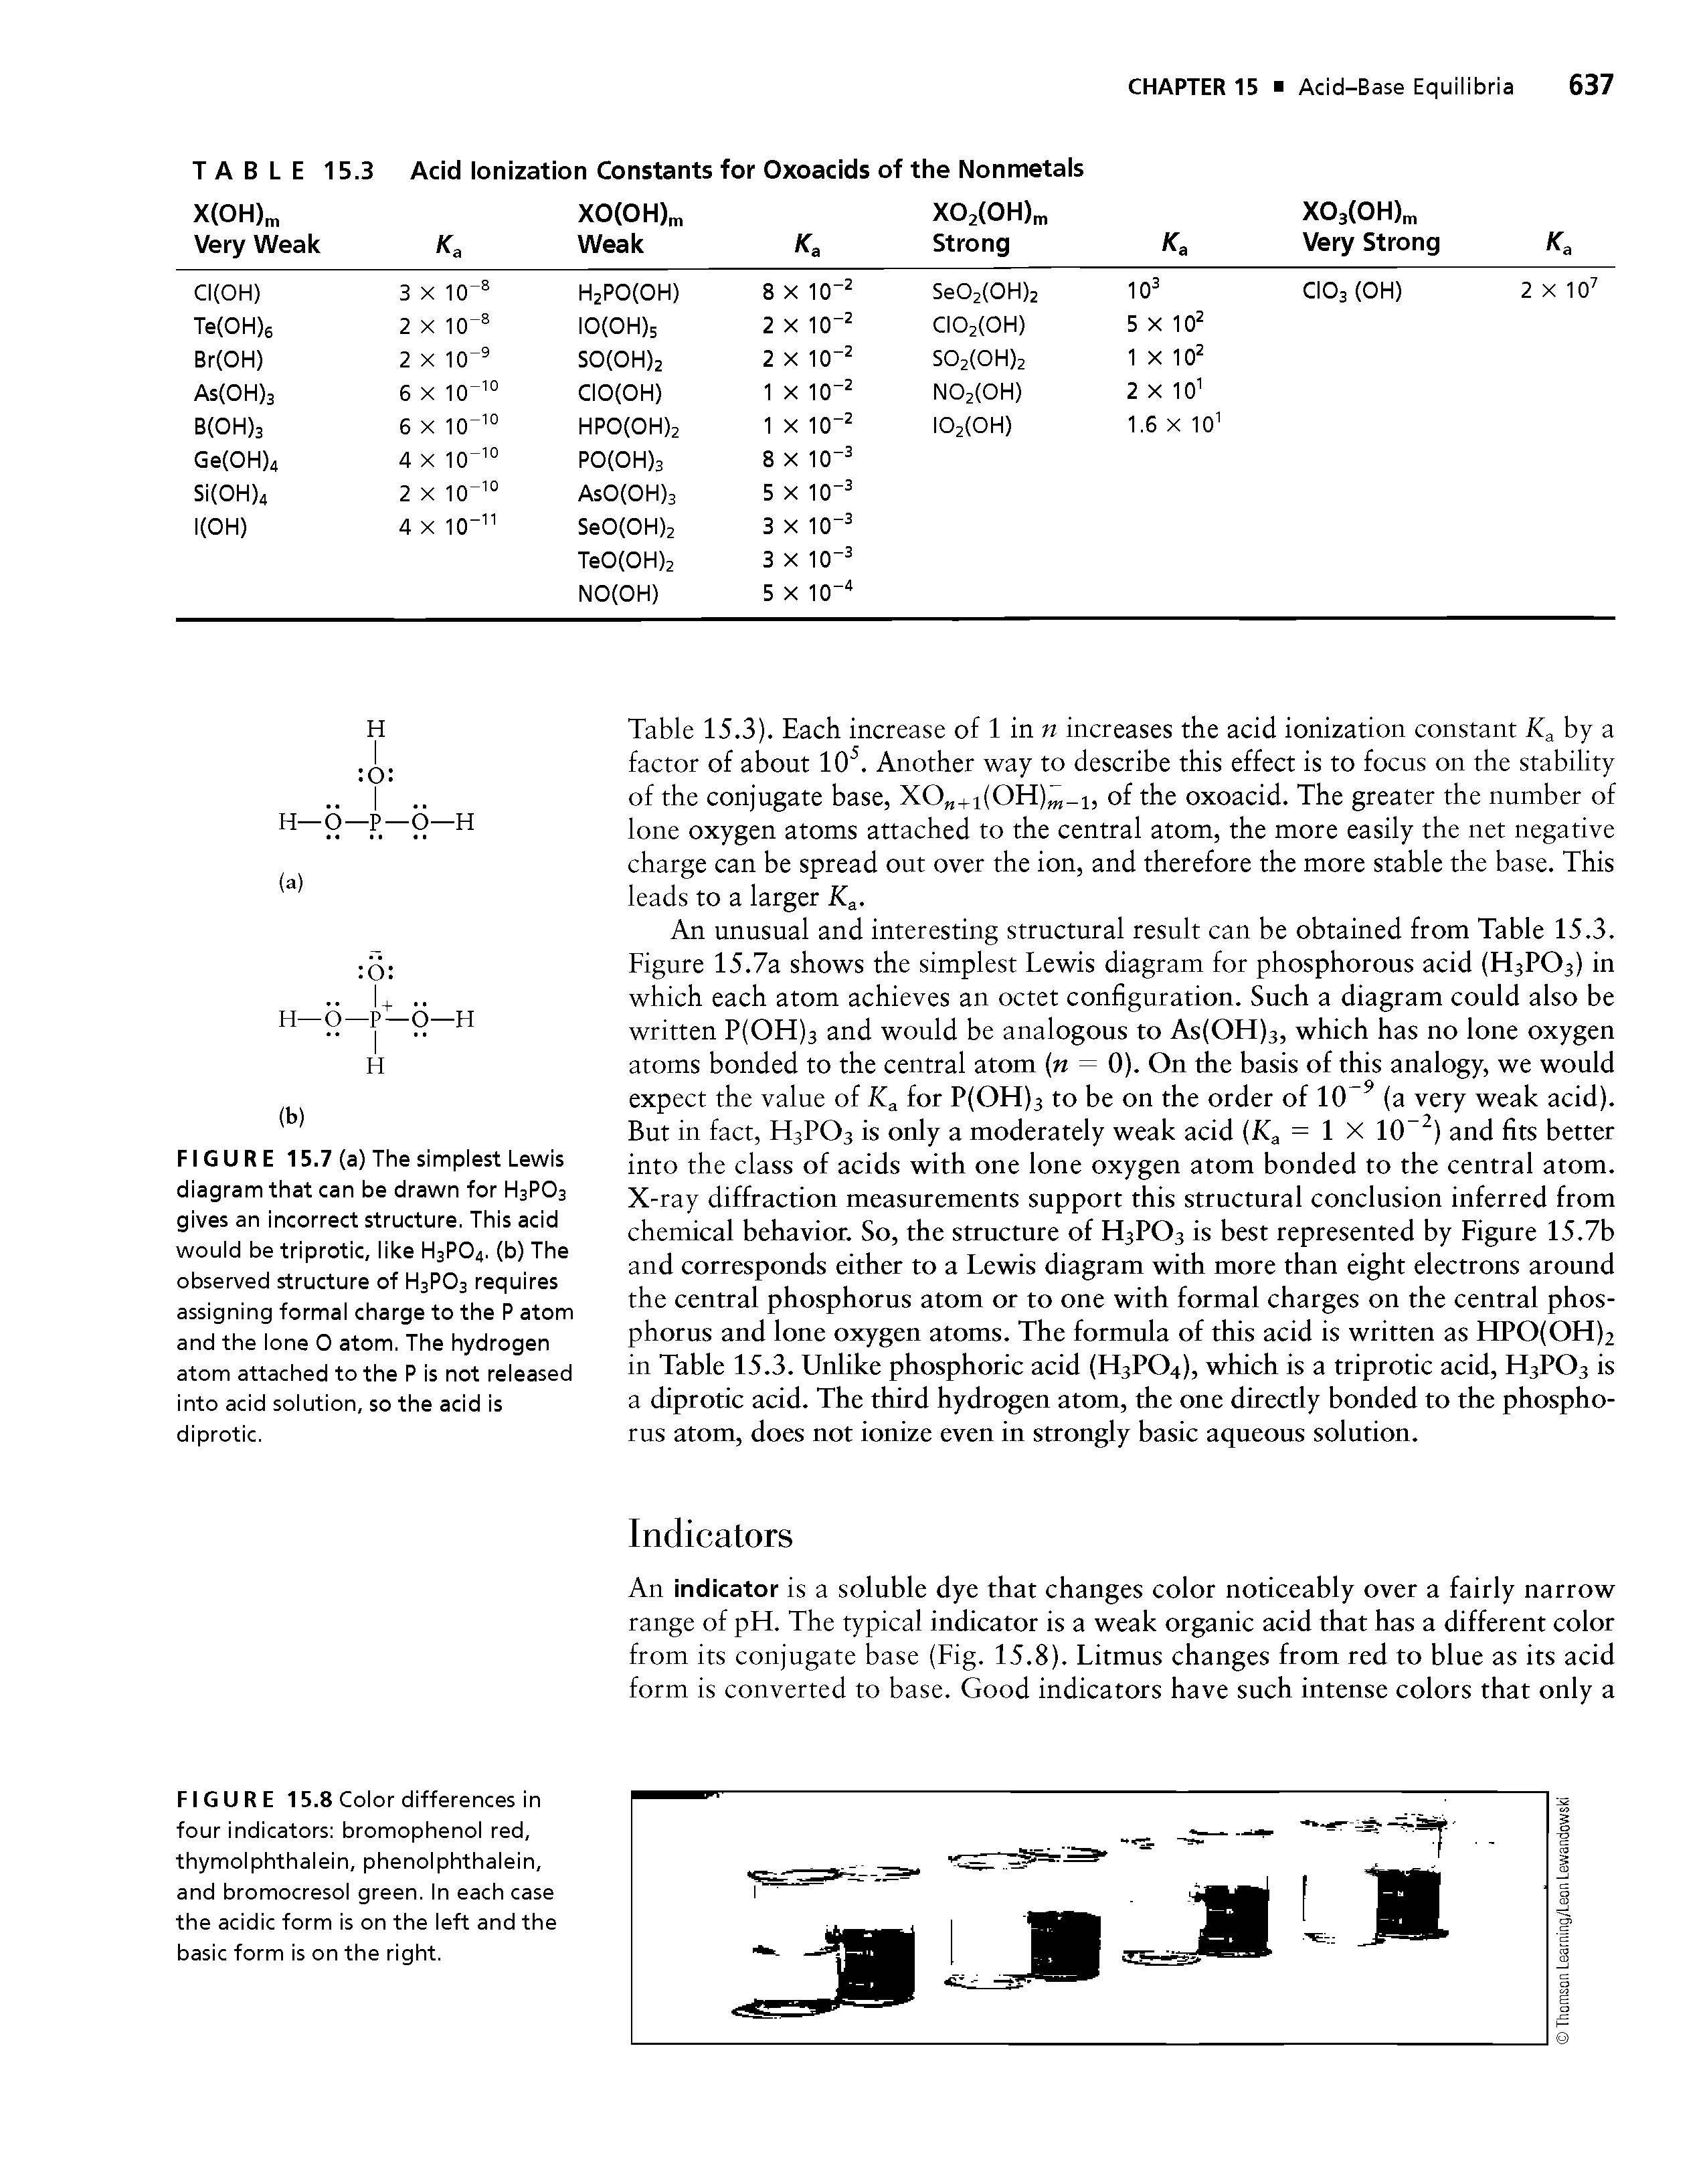 Table 15.3). Each increase of 1 in w increases the acid ionization constant by a factor of about 10. Another way to describe this effect is to focus on the stability of the conjugate base, XO +i(OH) i, of the oxoacid. The greater the number of lone oxygen atoms attached to the central atom, the more easily the net negative charge can be spread out over the ion, and therefore the more stable the base. This leads to a larger K. ...